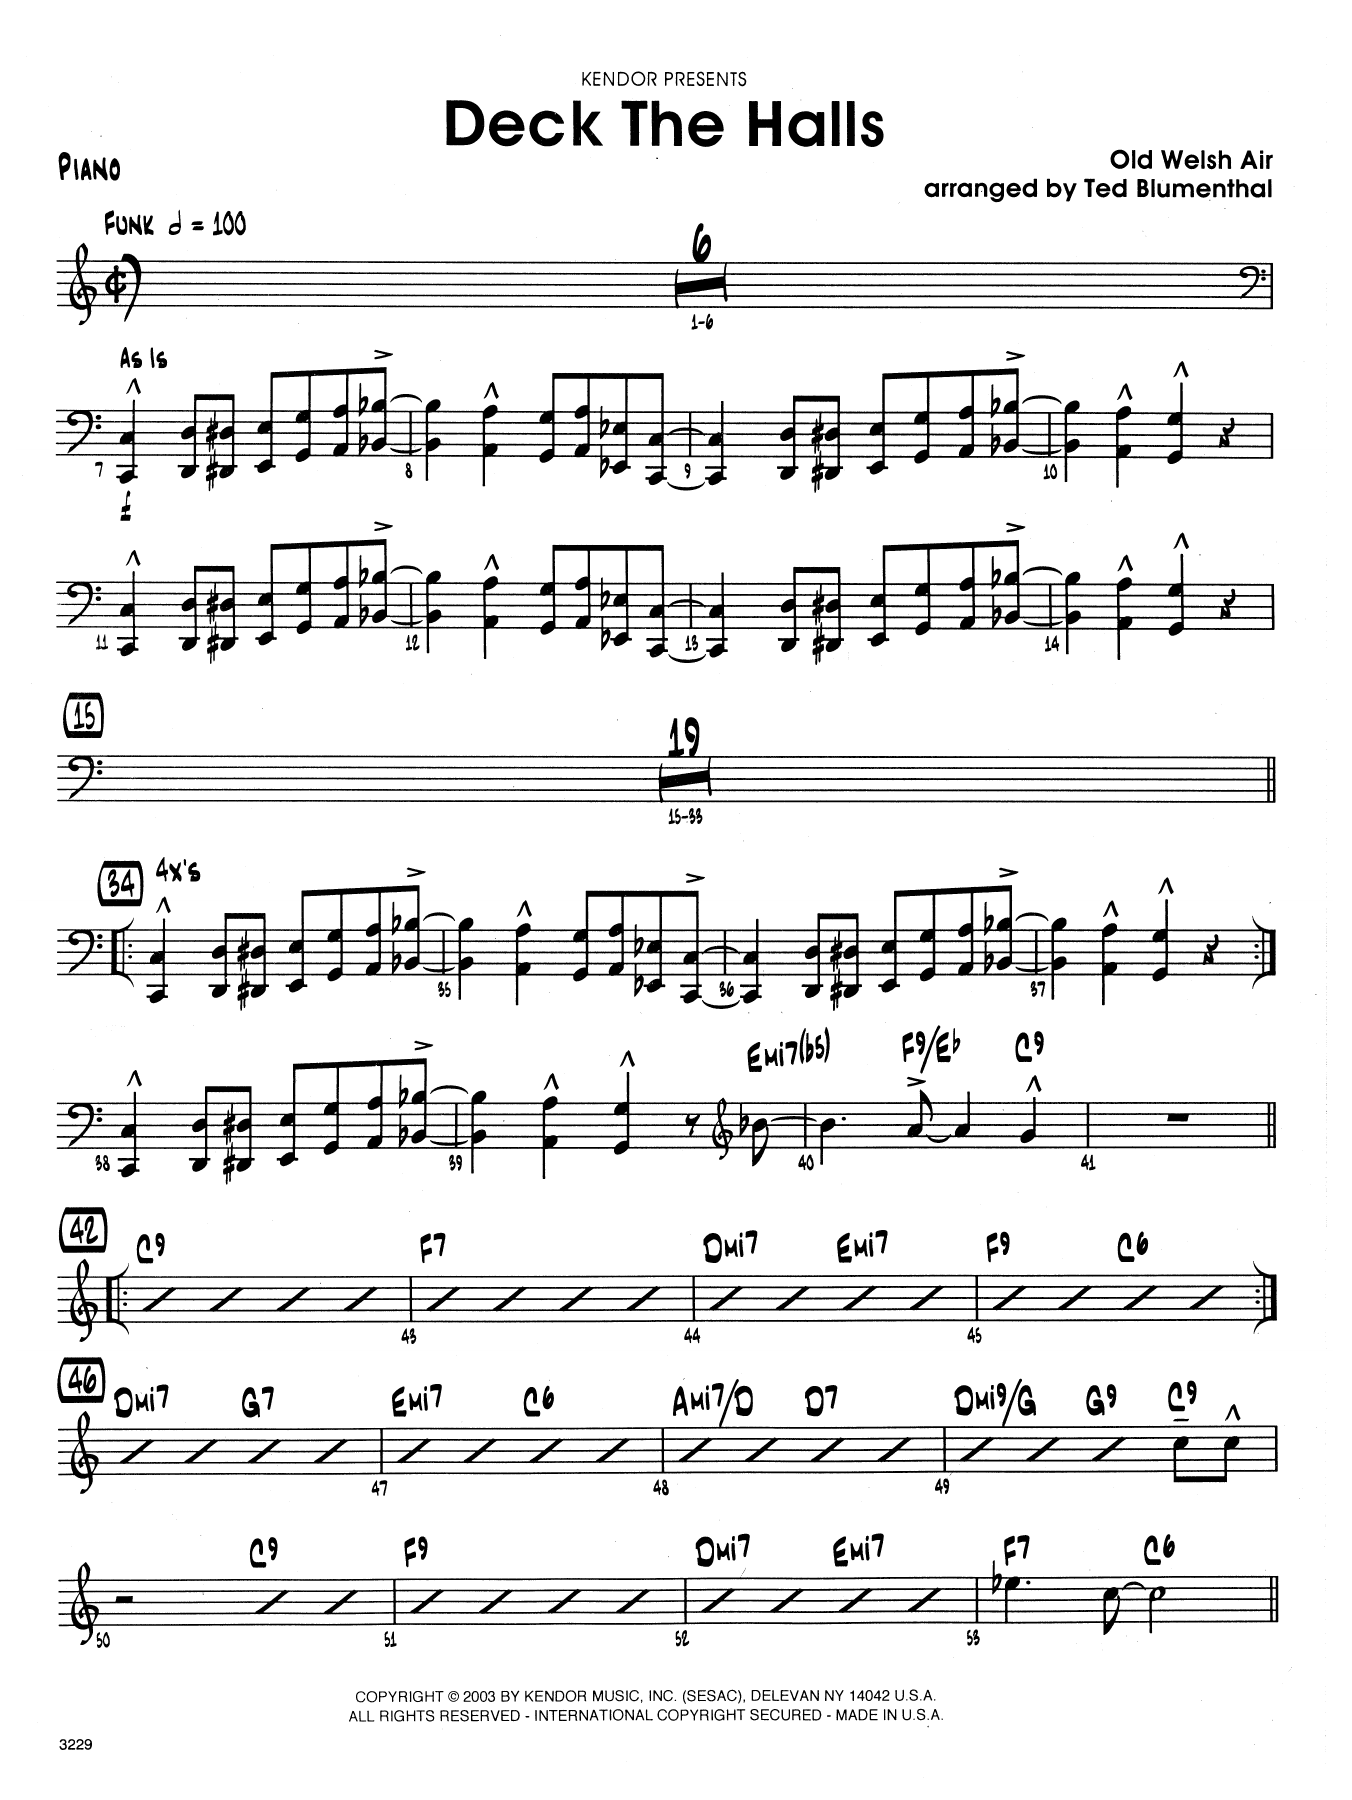 Download Ted Blumenthal Deck the Halls - Piano Sheet Music